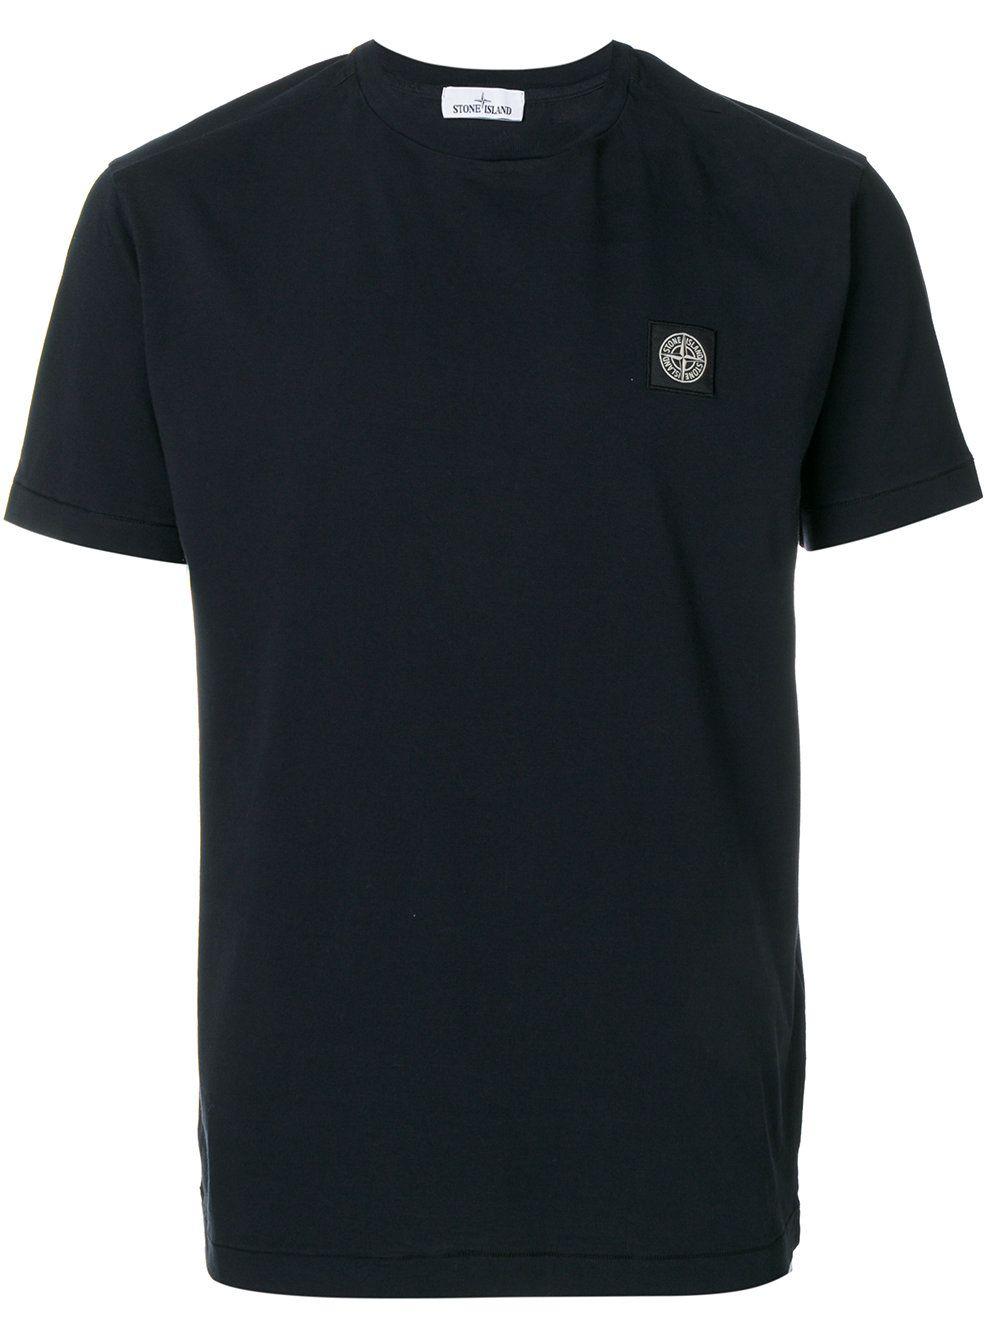 Leading Clothing and Accessories Retailer Logo - Stone Island Logo Patch T Shirt BLUE Men Online Leading Retailer